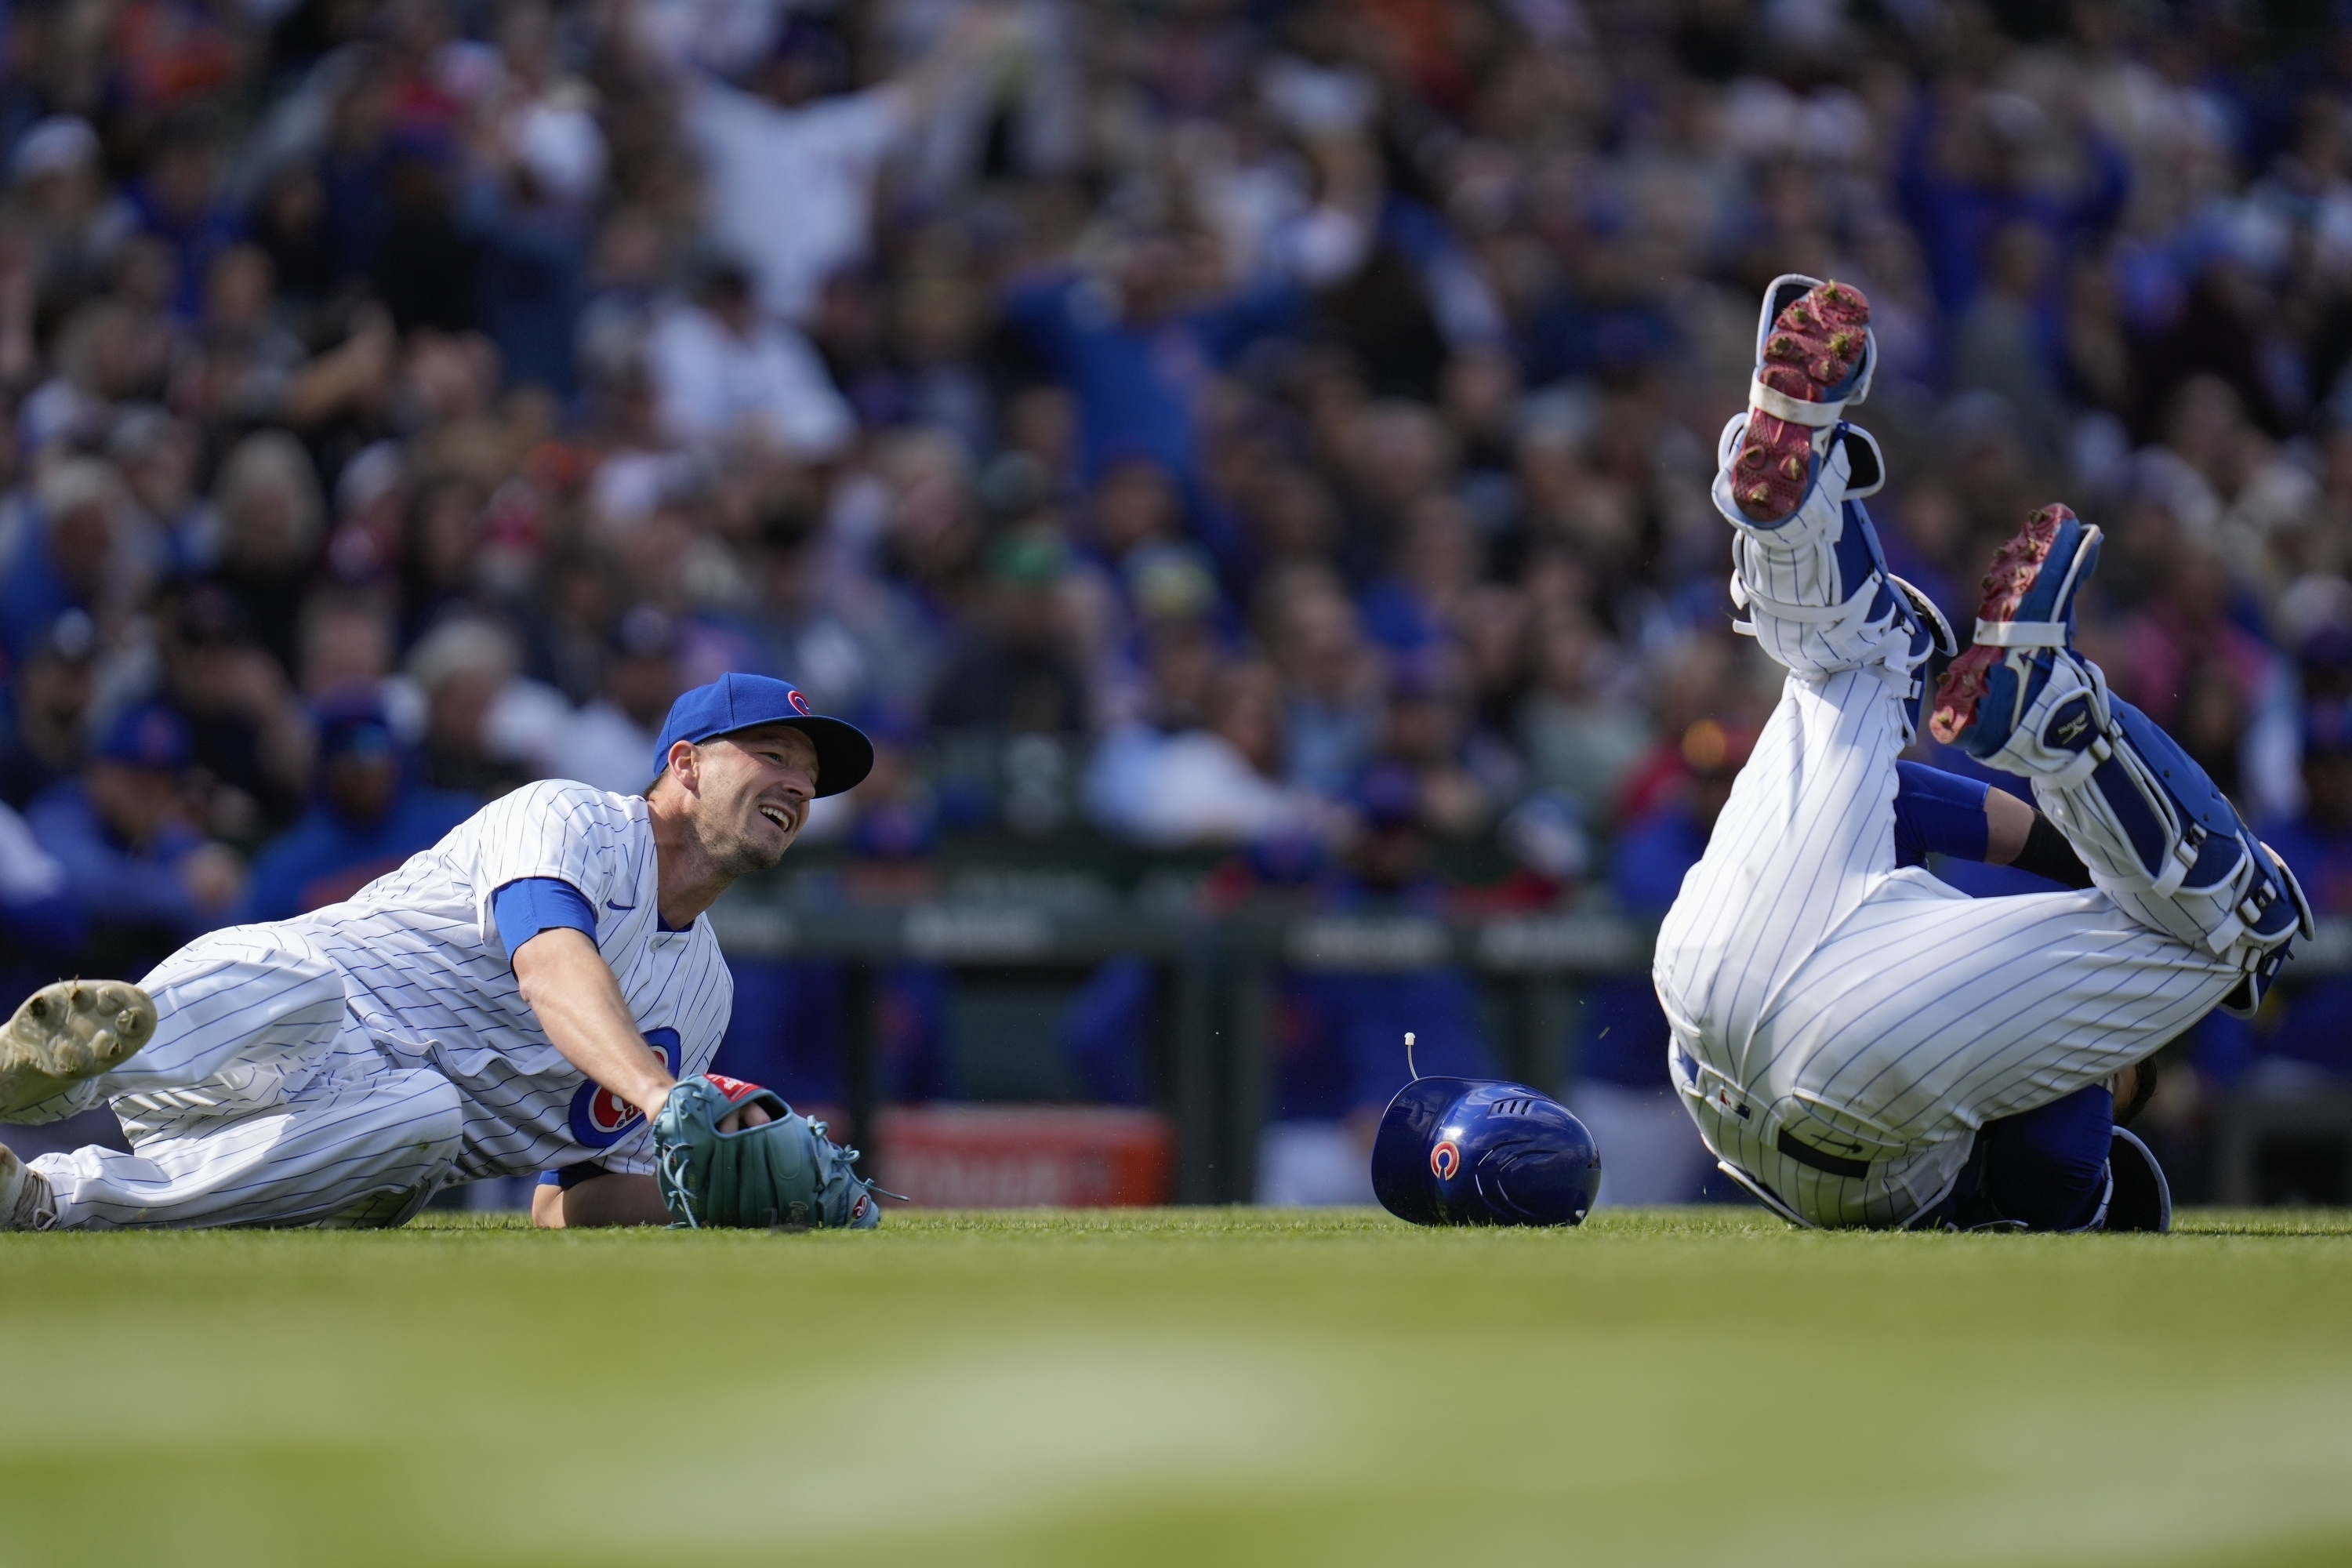 Cubs' Drew Smyly loses perfect game bid to infield dribbler after